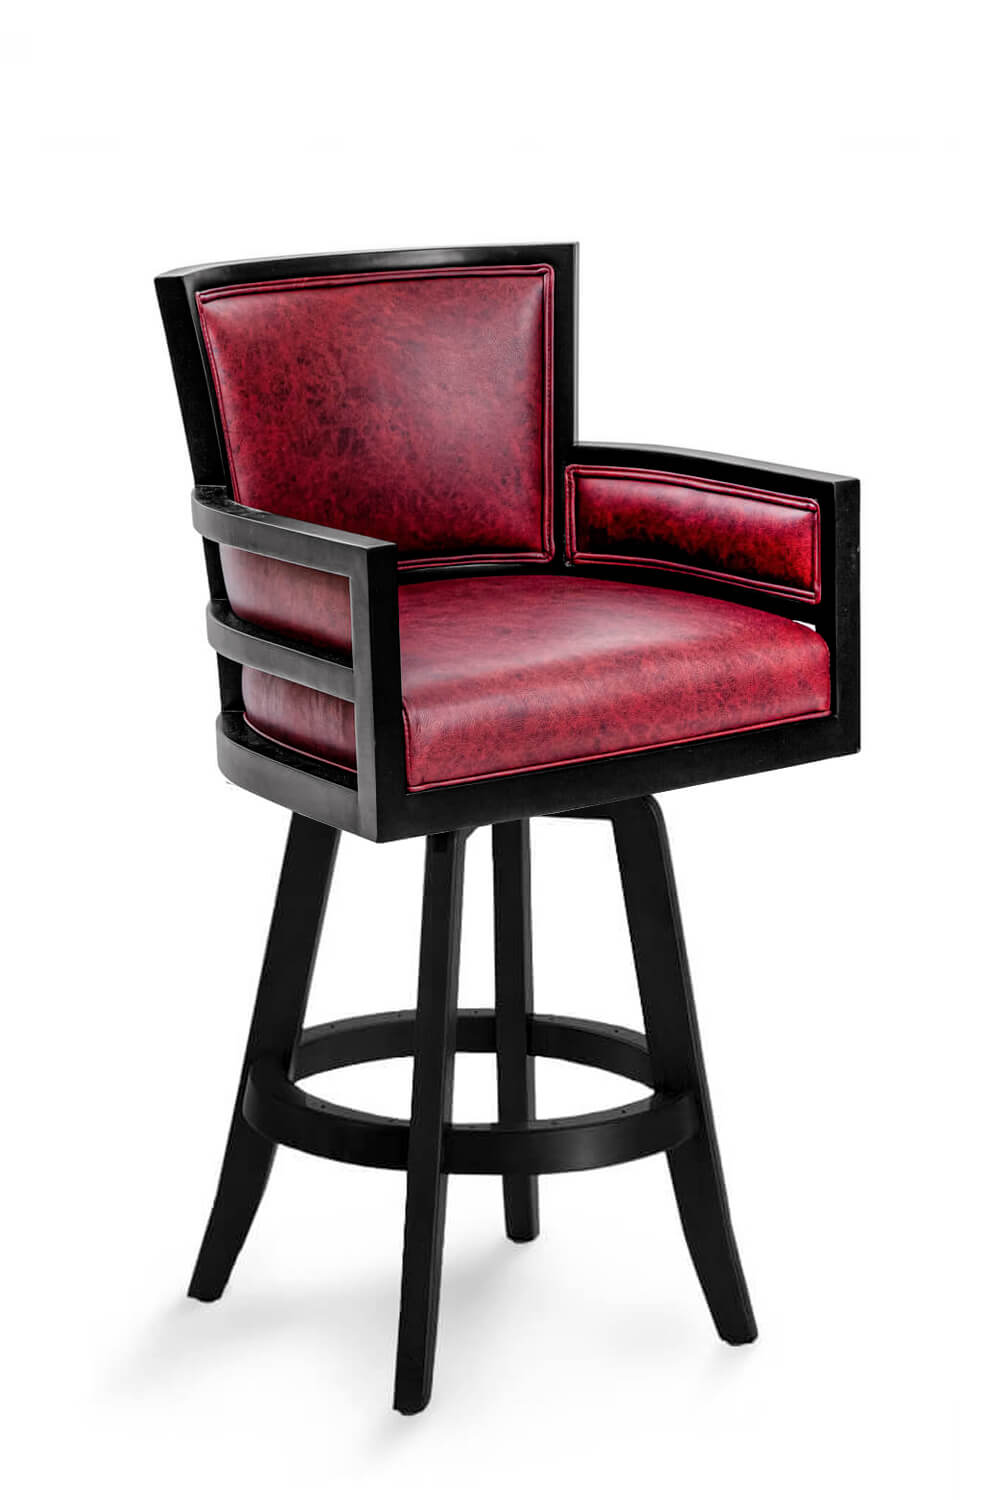 Metra Upholstered Wood Swivel Stool, Red Leather Bar Stools